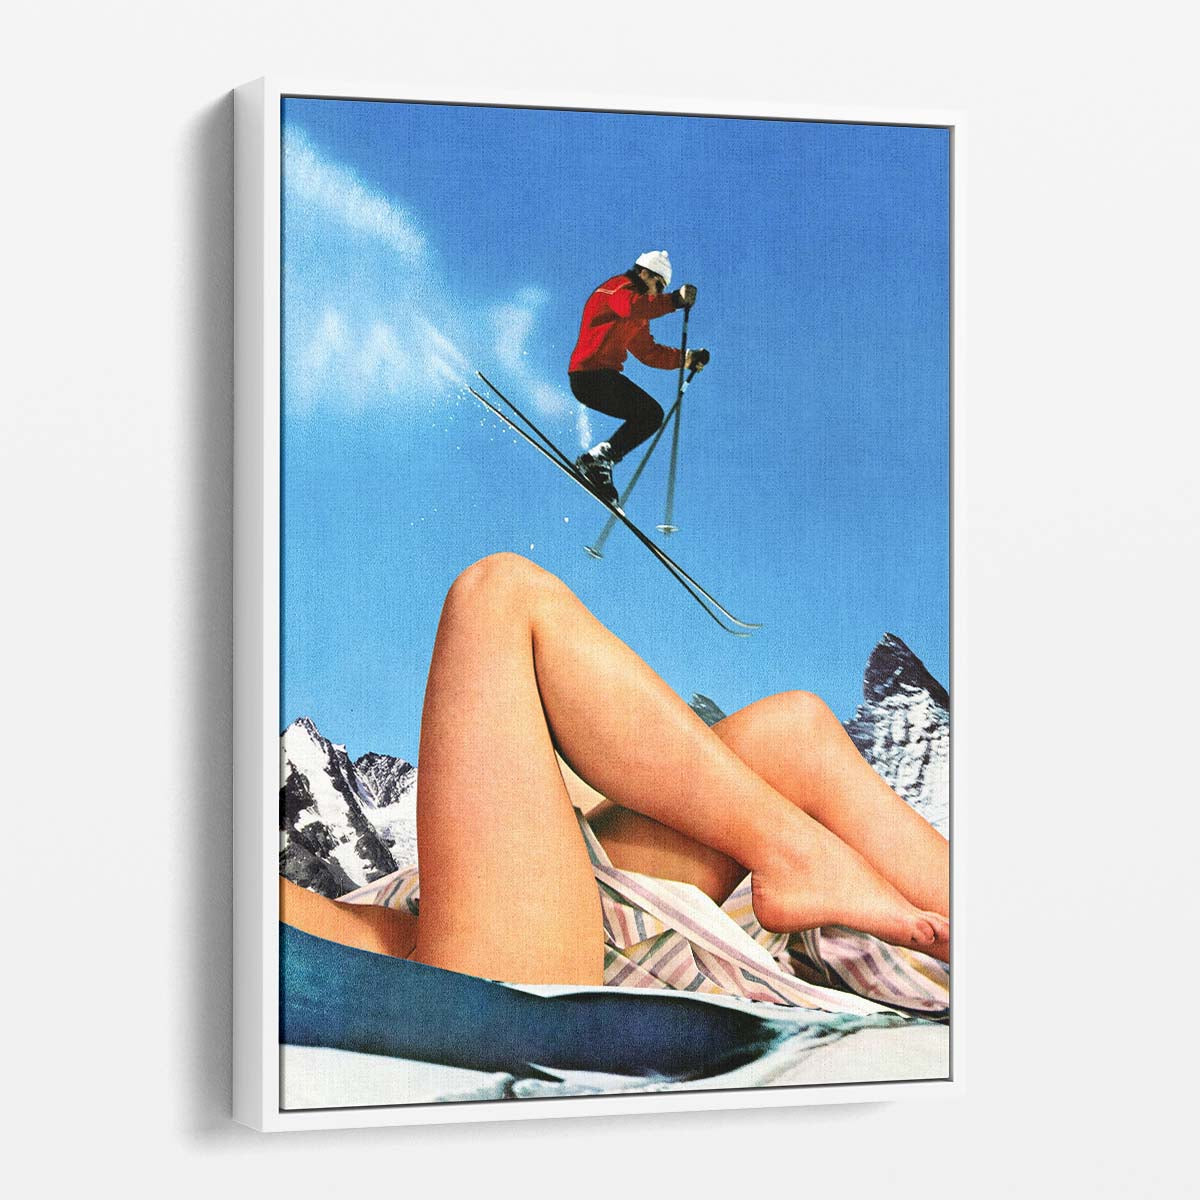 Vintage Winter Sports Collage Art, Funny Skiing Action by Taudalpoi by Luxuriance Designs, made in USA